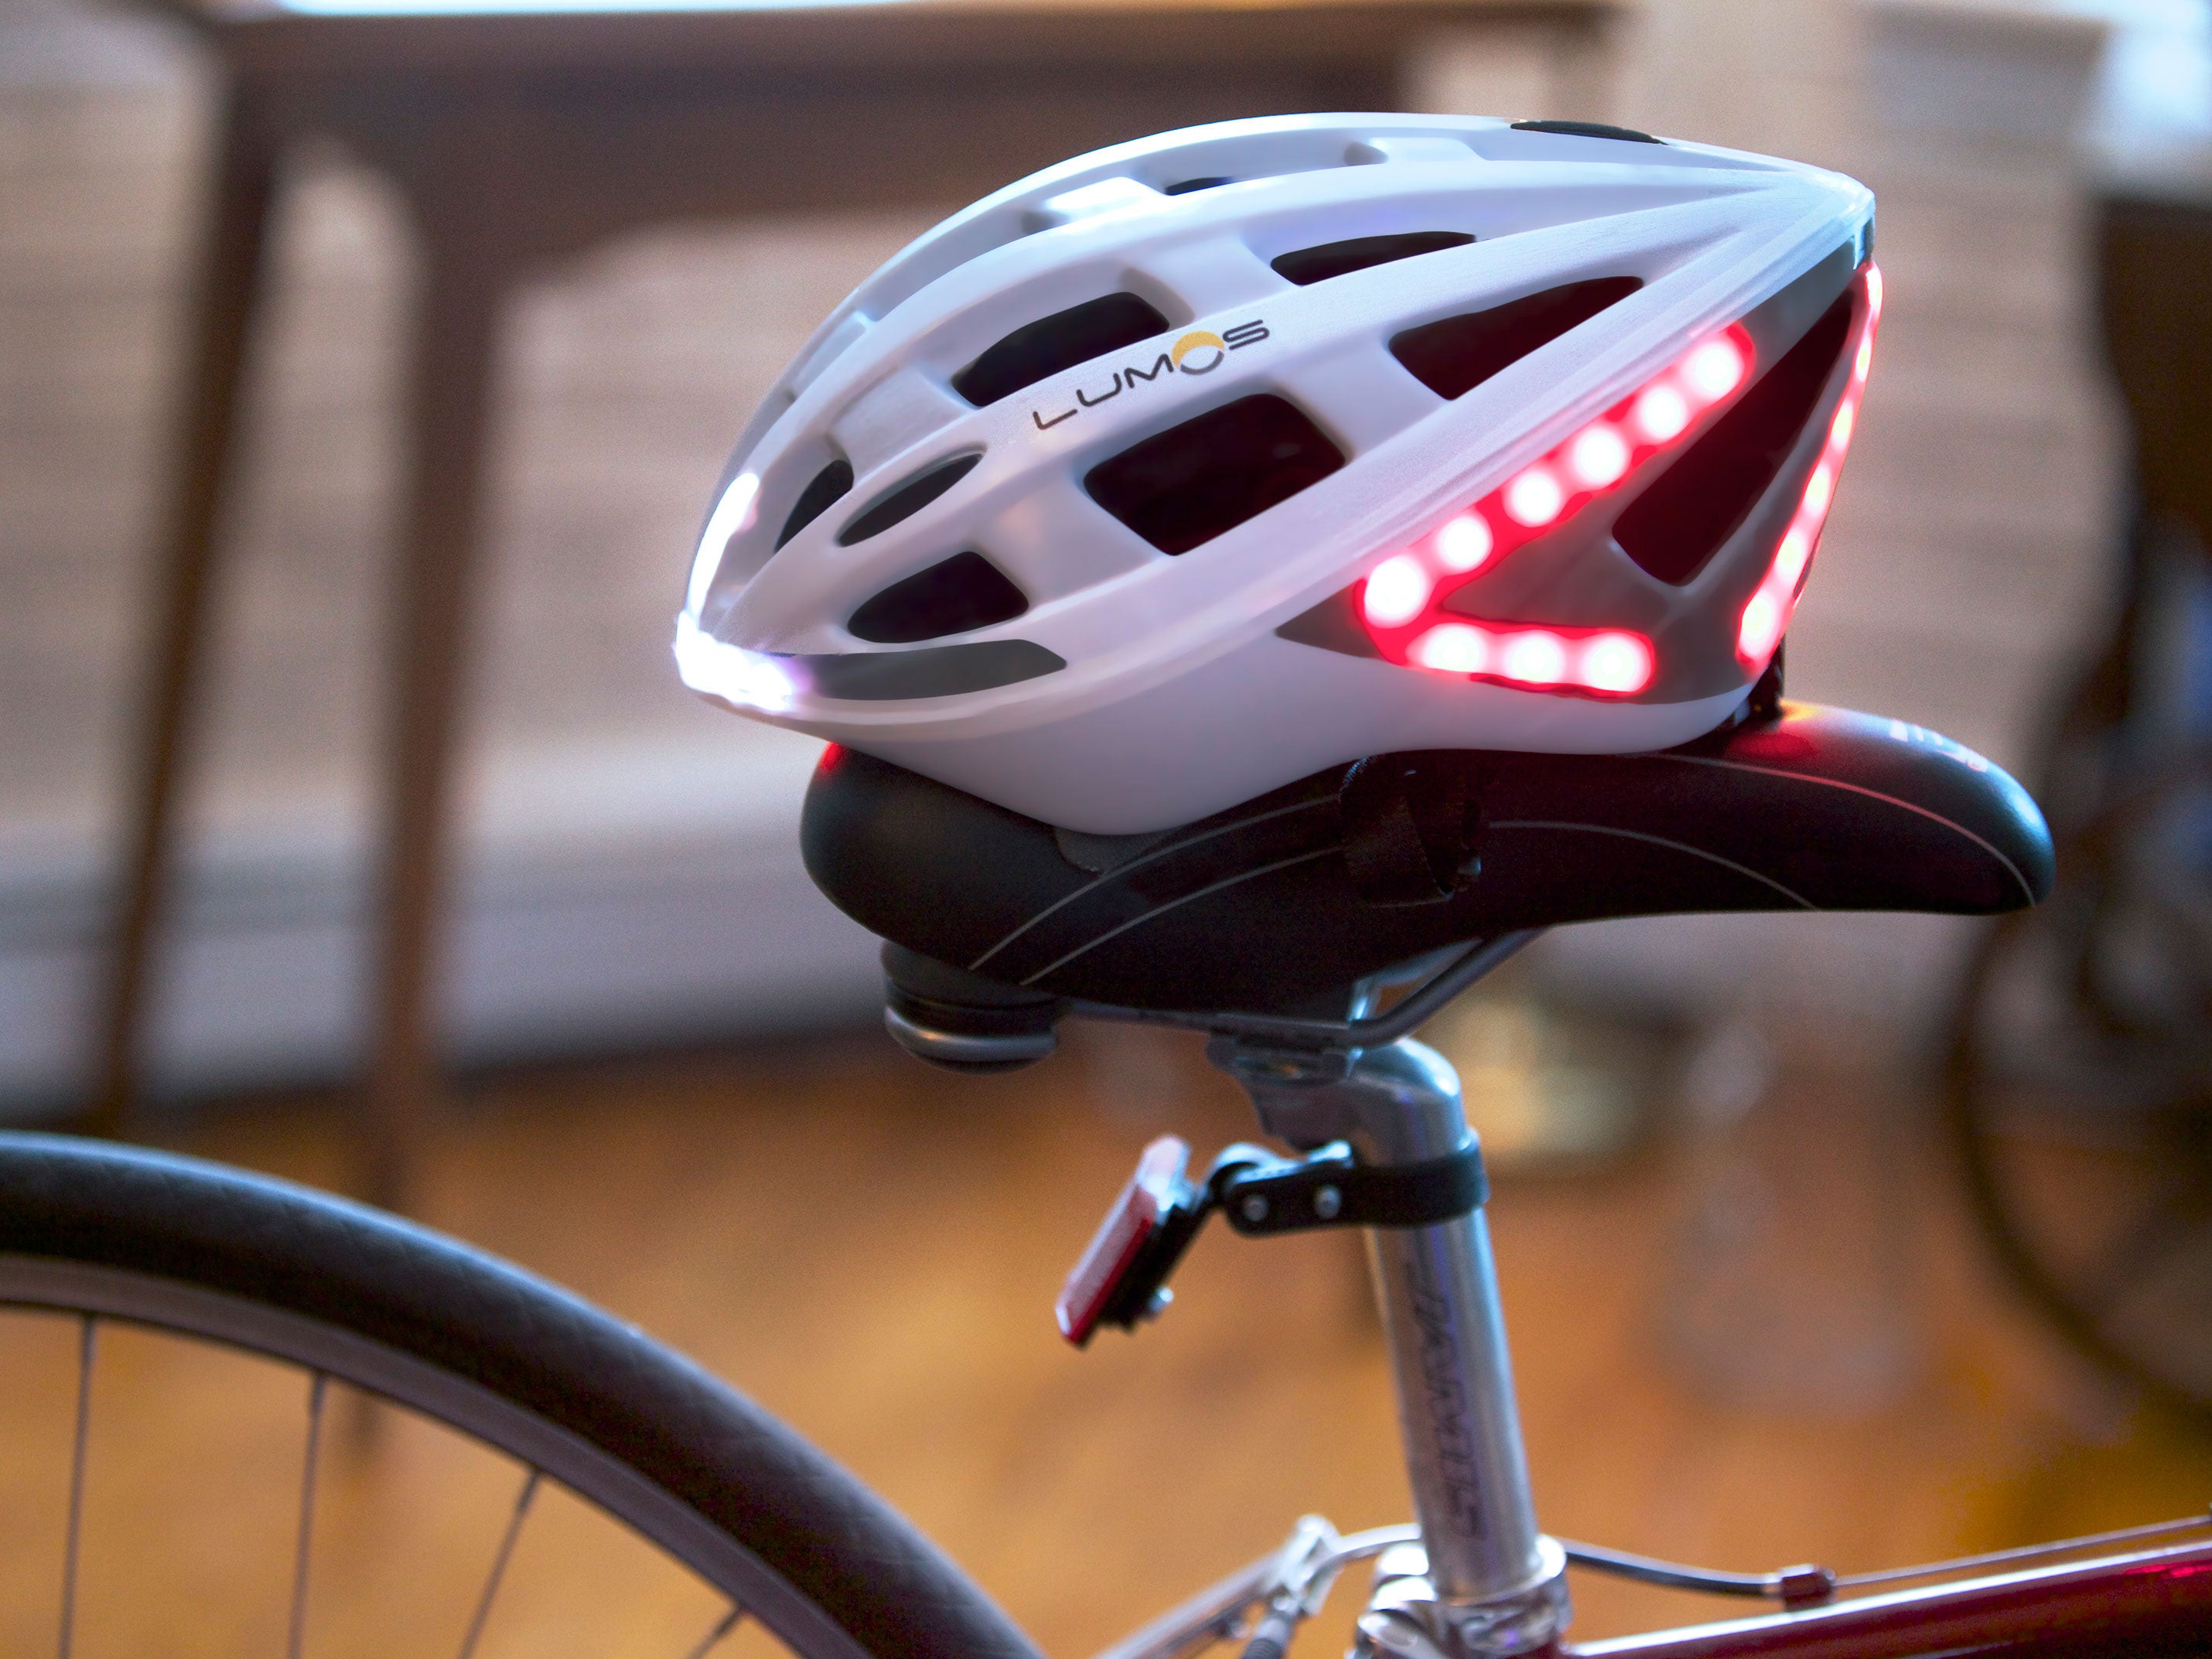 Built-in indicators and brake lights on the Lumos could help cyclists stay safer on the road